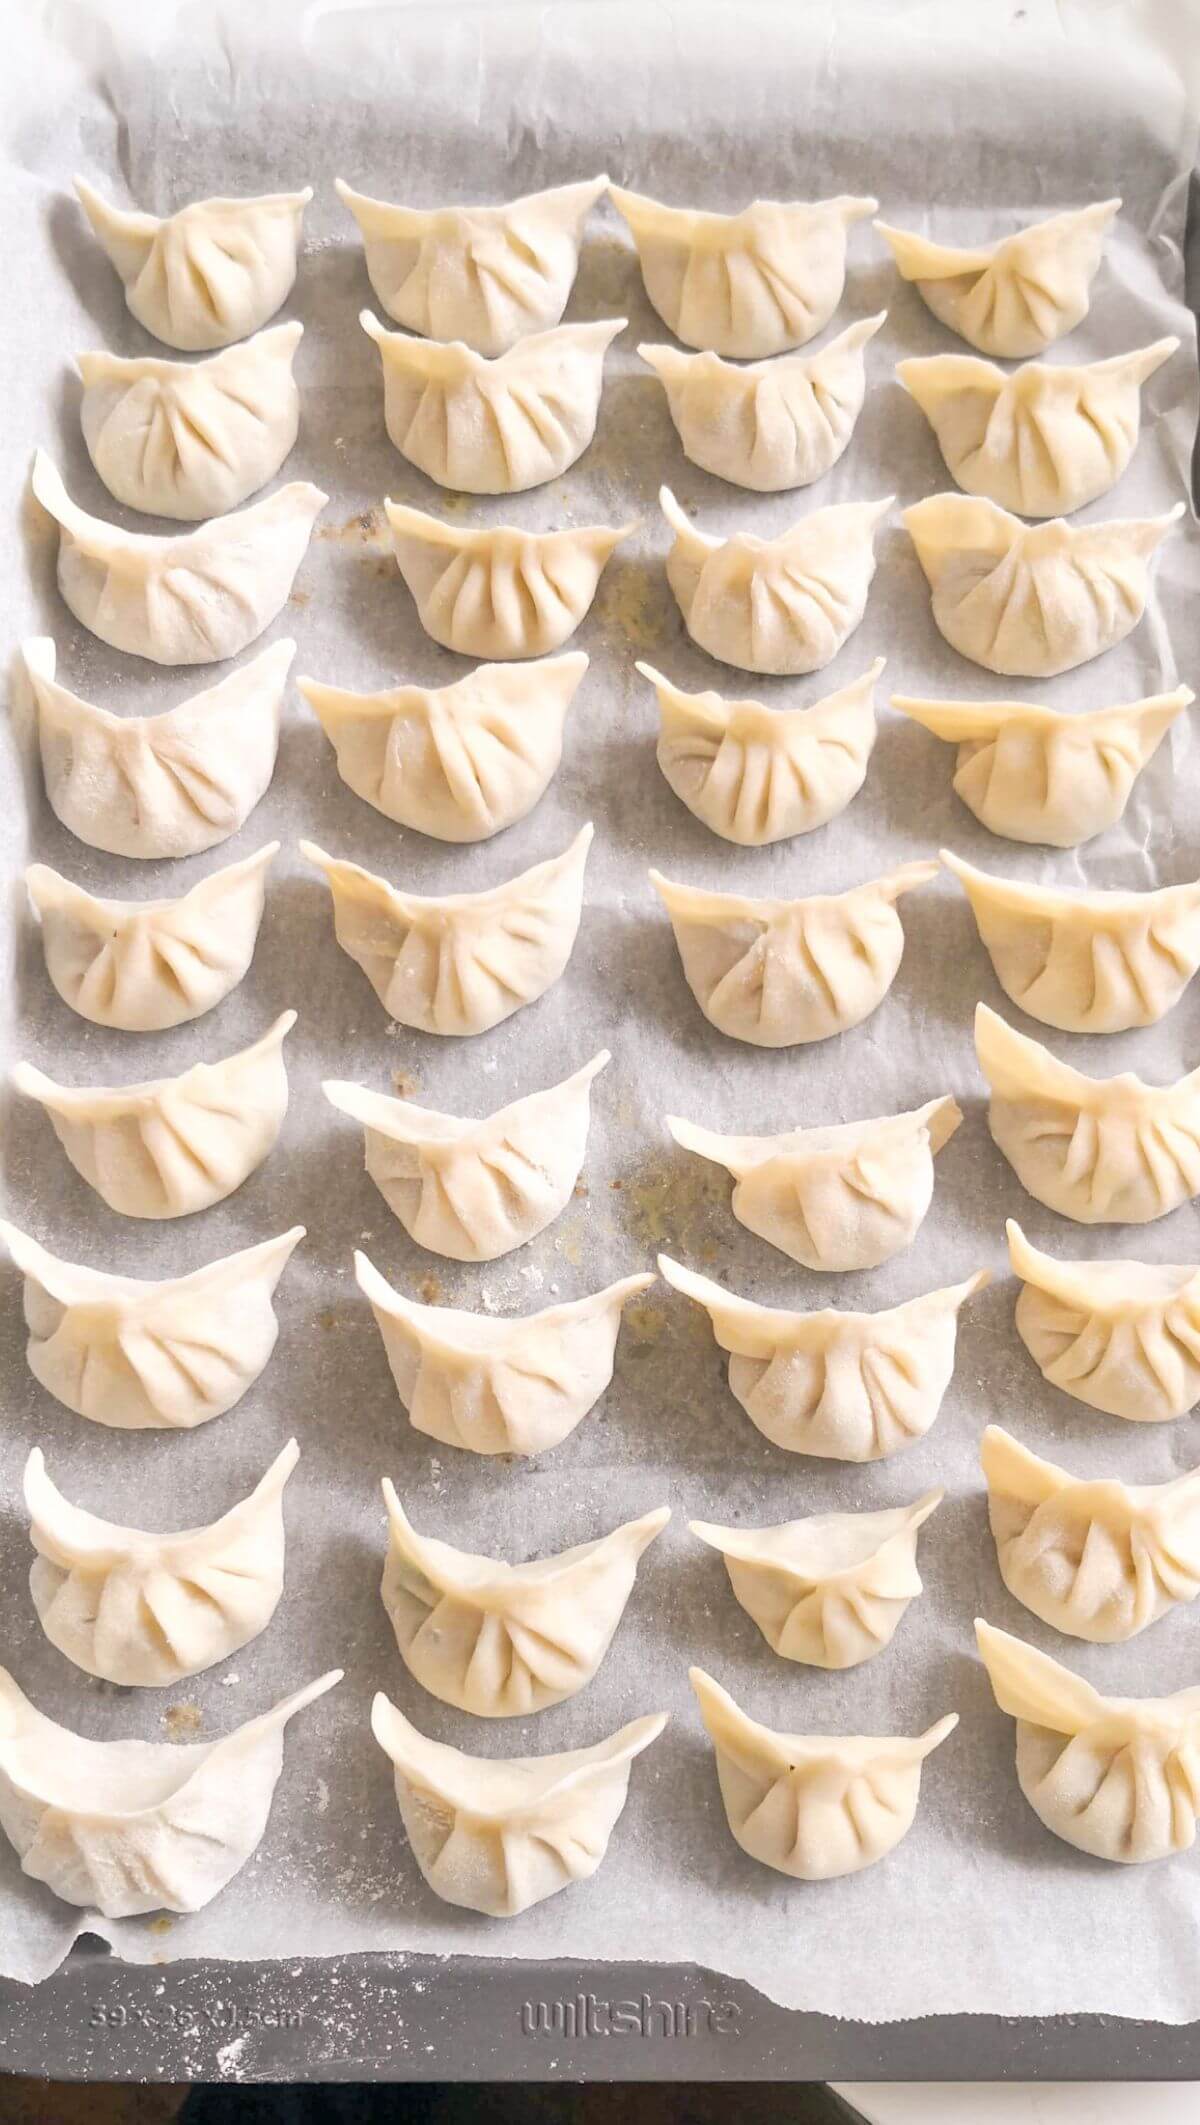 How To Make Dumpling Wrappers (2 Ingredients)